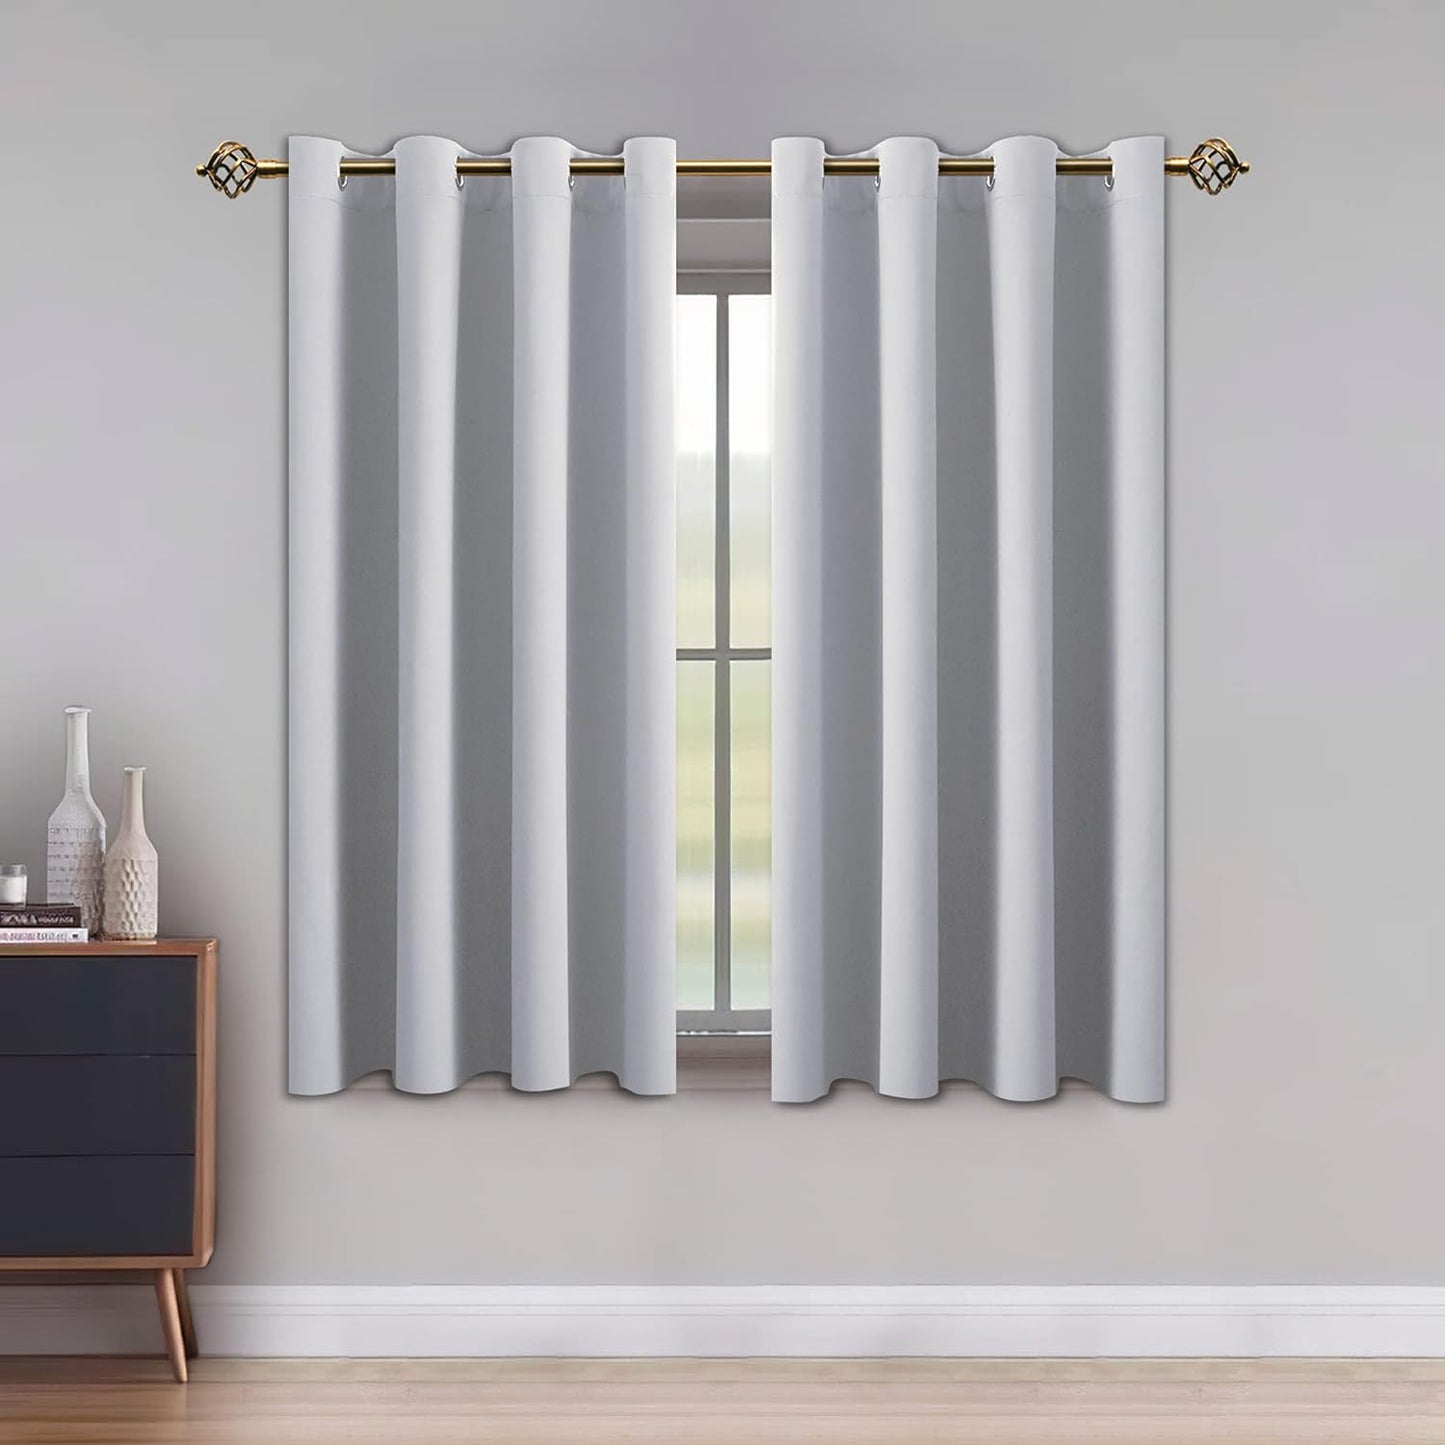 LUSHLEAF Blackout Curtains for Bedroom, Solid Thermal Insulated with Grommet Noise Reduction Window Drapes, Room Darkening Curtains for Living Room, 2 Panels, 52 X 63 Inch Grey  SHEEROOM Silver Grey 52 X 45 Inch 